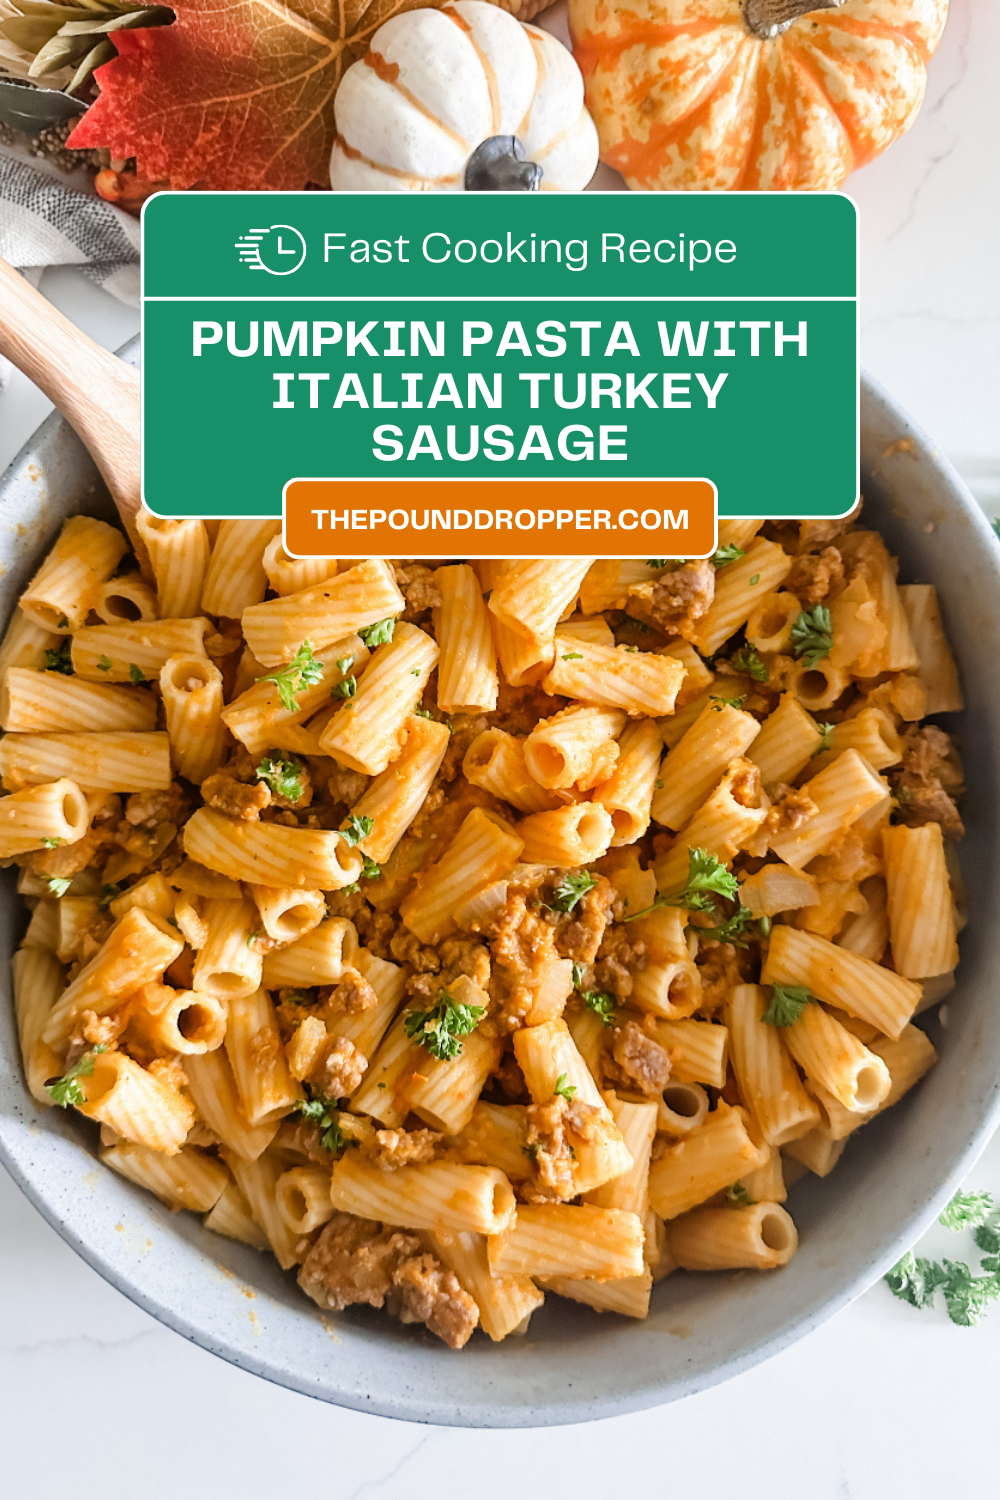 This Pumpkin Pasta with Italian Turkey Sausage is the perfect Fall meal! Simple to make, packed with delicious pumpkin flavor, and is ready in less than 30 minutes! via @pounddropper